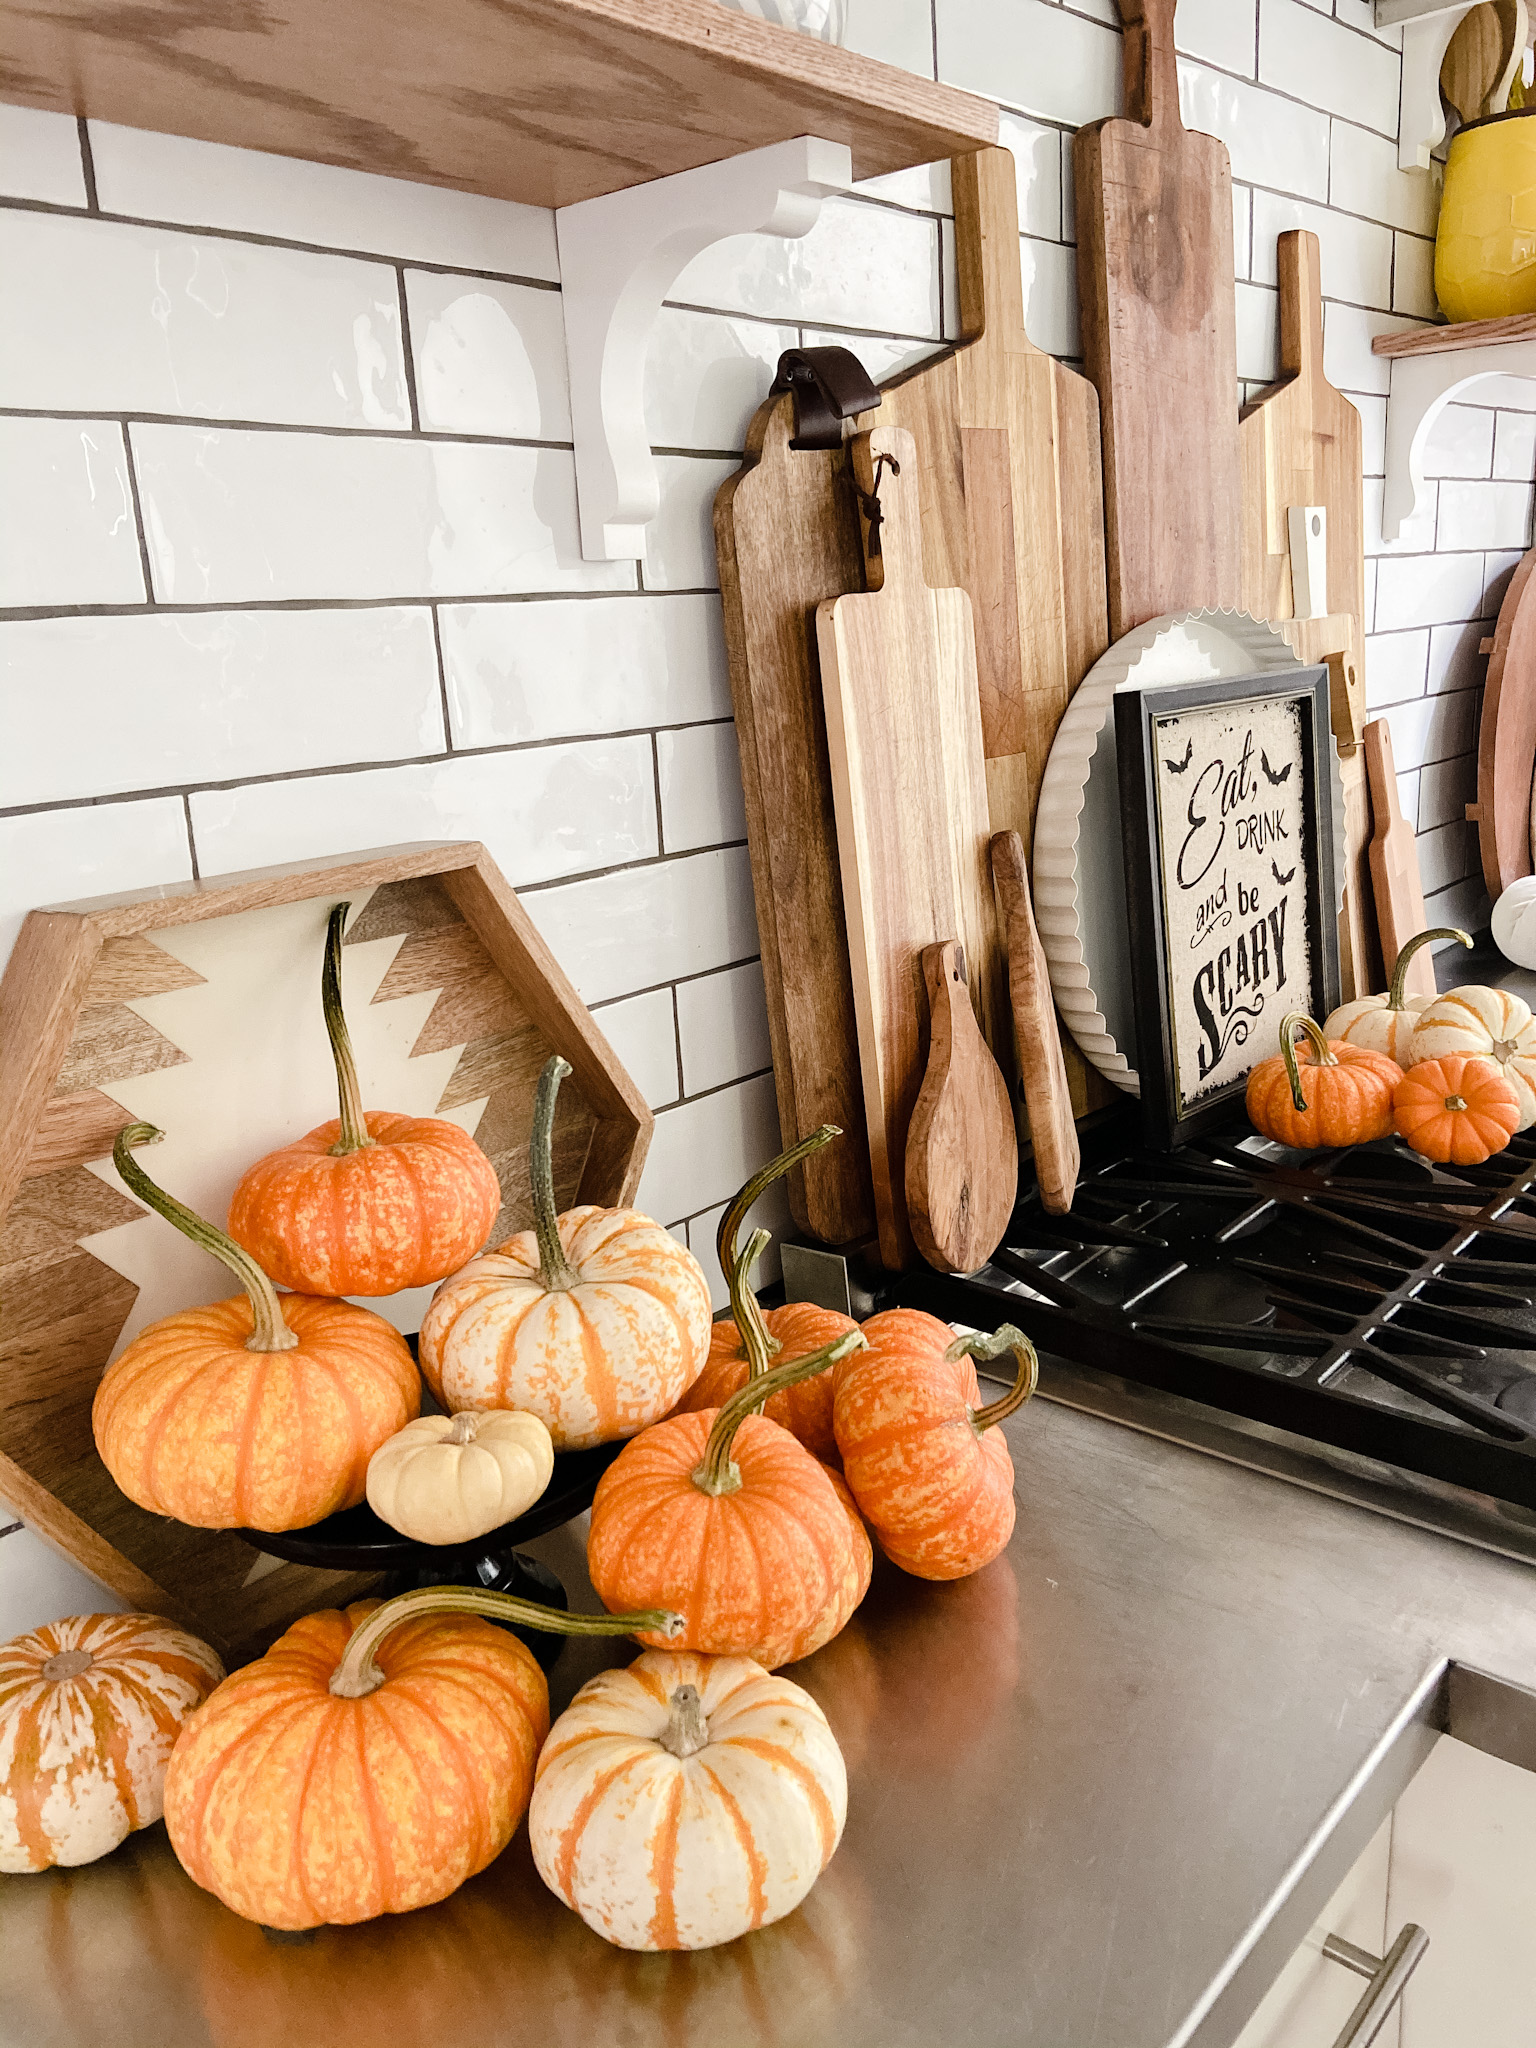 Boho Cottage Colorful Fall Home Tour. Bring warm and cozy vibes into your home for fall with these easy fall decorating ideas for your porch, entryway, kitchen, family room and stairs. 